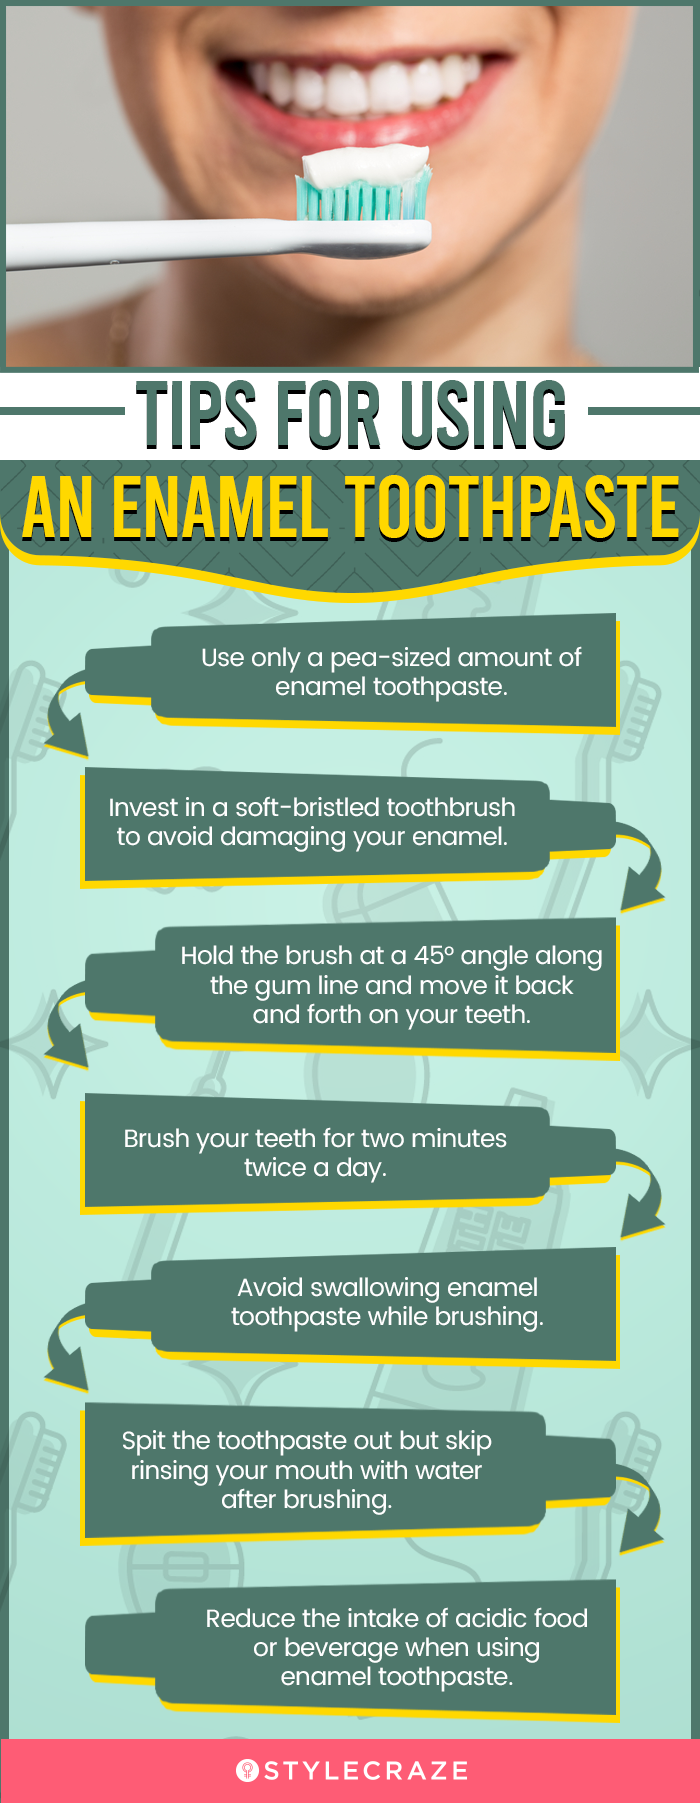 Tips For Using An Enamel Toothpaste(infographic)